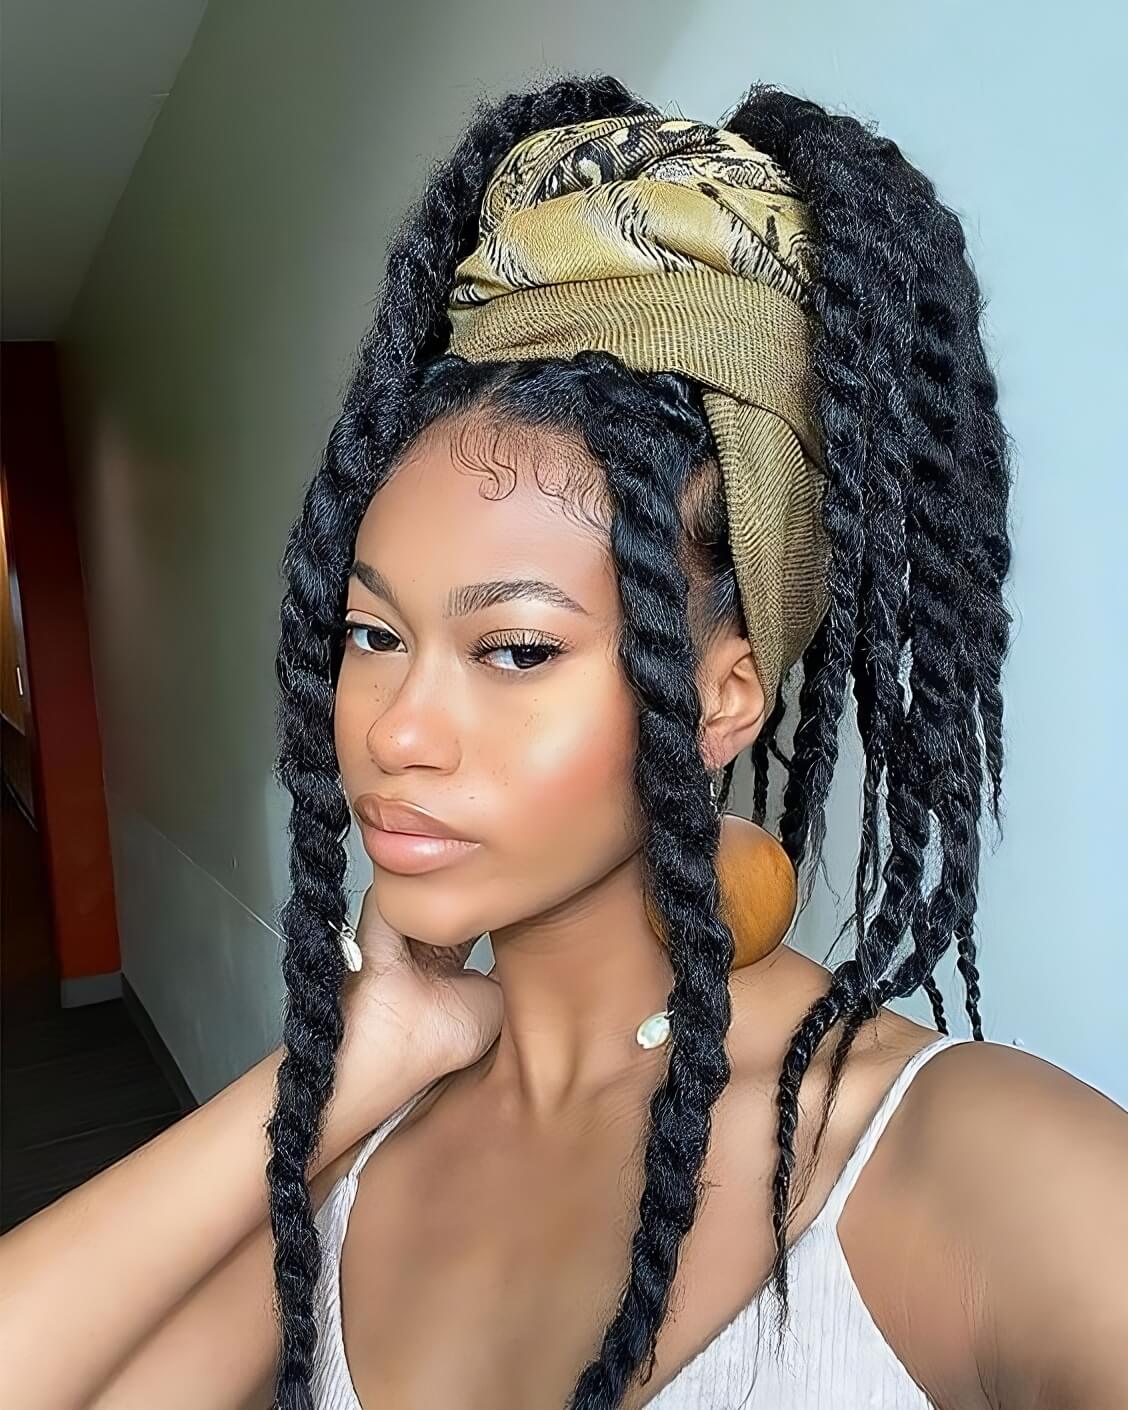 50 Trendy Braided Hairstyles To Instantly Glam Up Your Look - 363